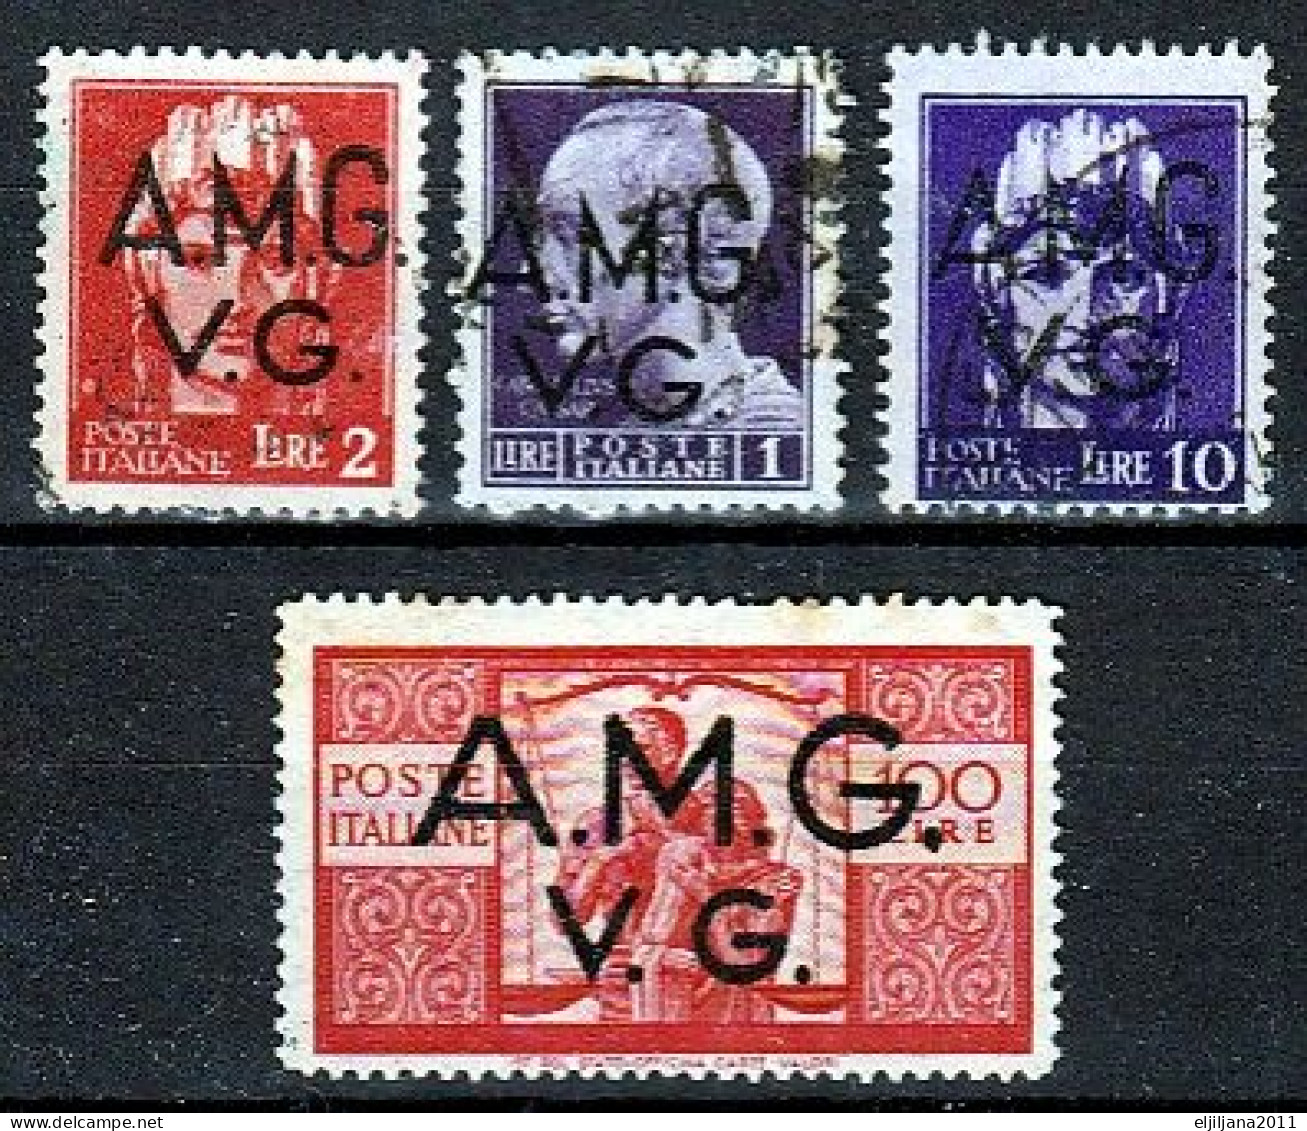 Action !! SALE !! 50 % OFF !! ⁕ Italy - TRIESTE 1945 ⁕ AMG VG Overprint ⁕ 4v Used - Afgestempeld